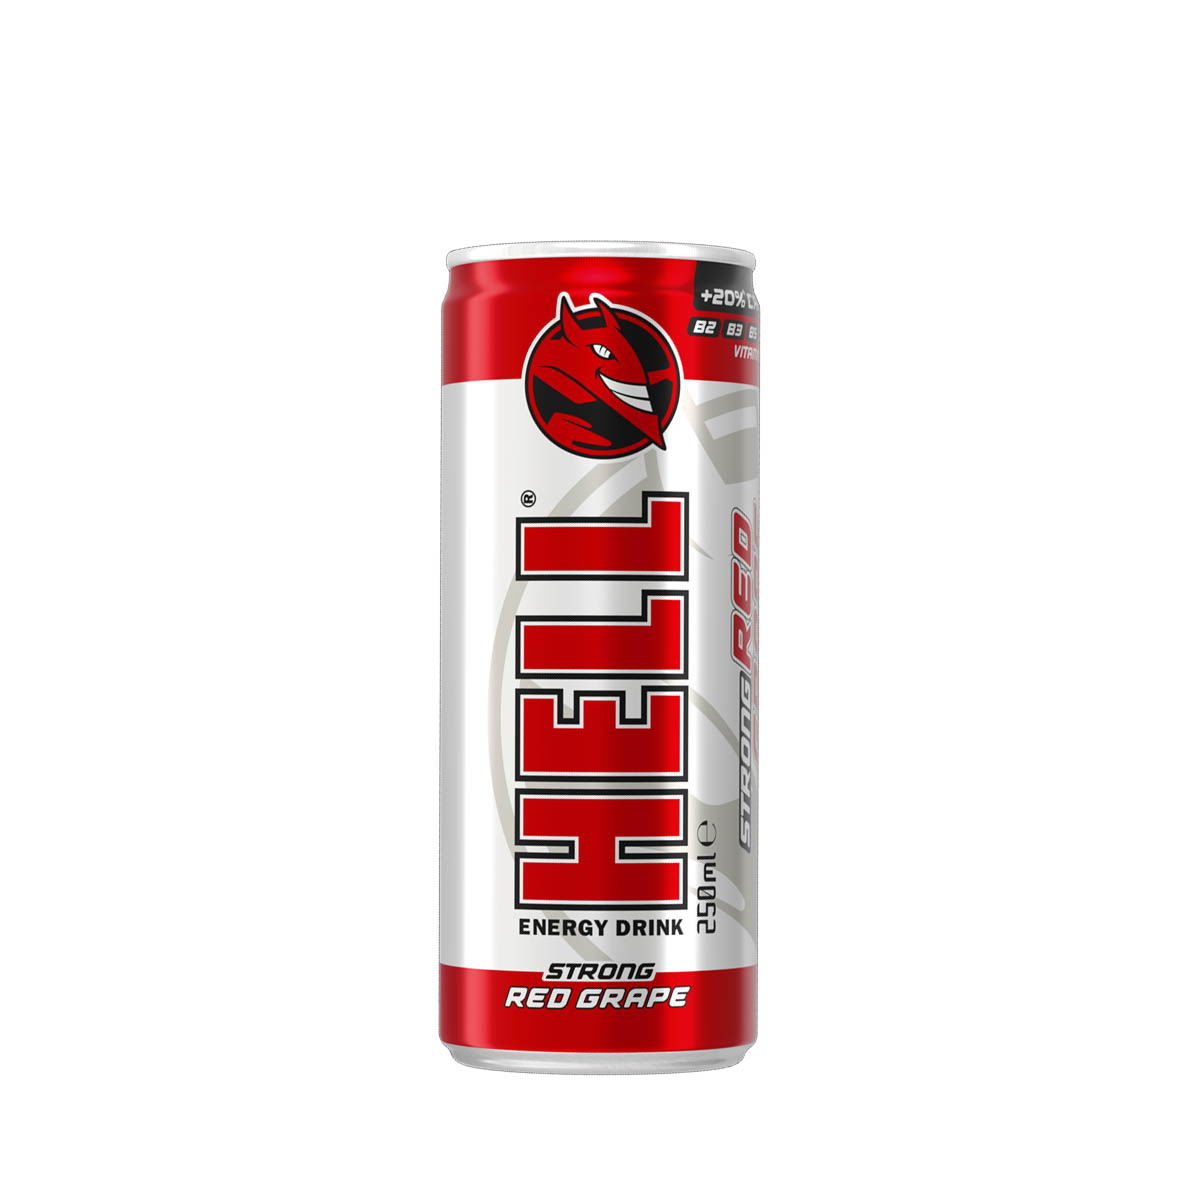 HELL STRONG RED GRAPE 250ml